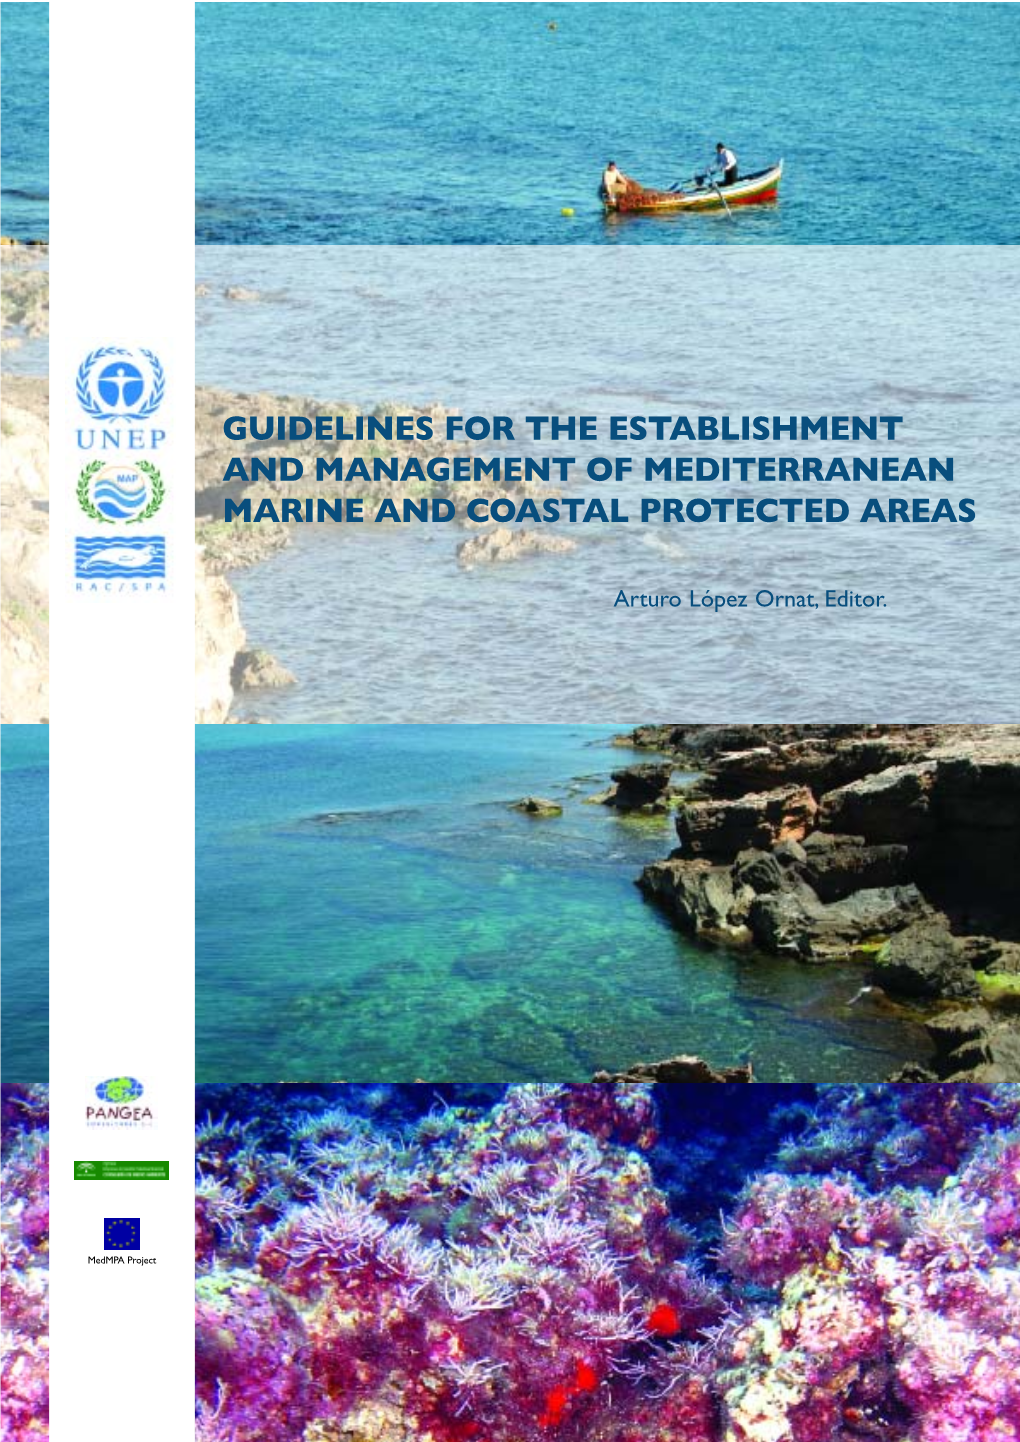 Guidelines for the Establishment and Management of Mediterranean Marine and Coastal Protected Areas